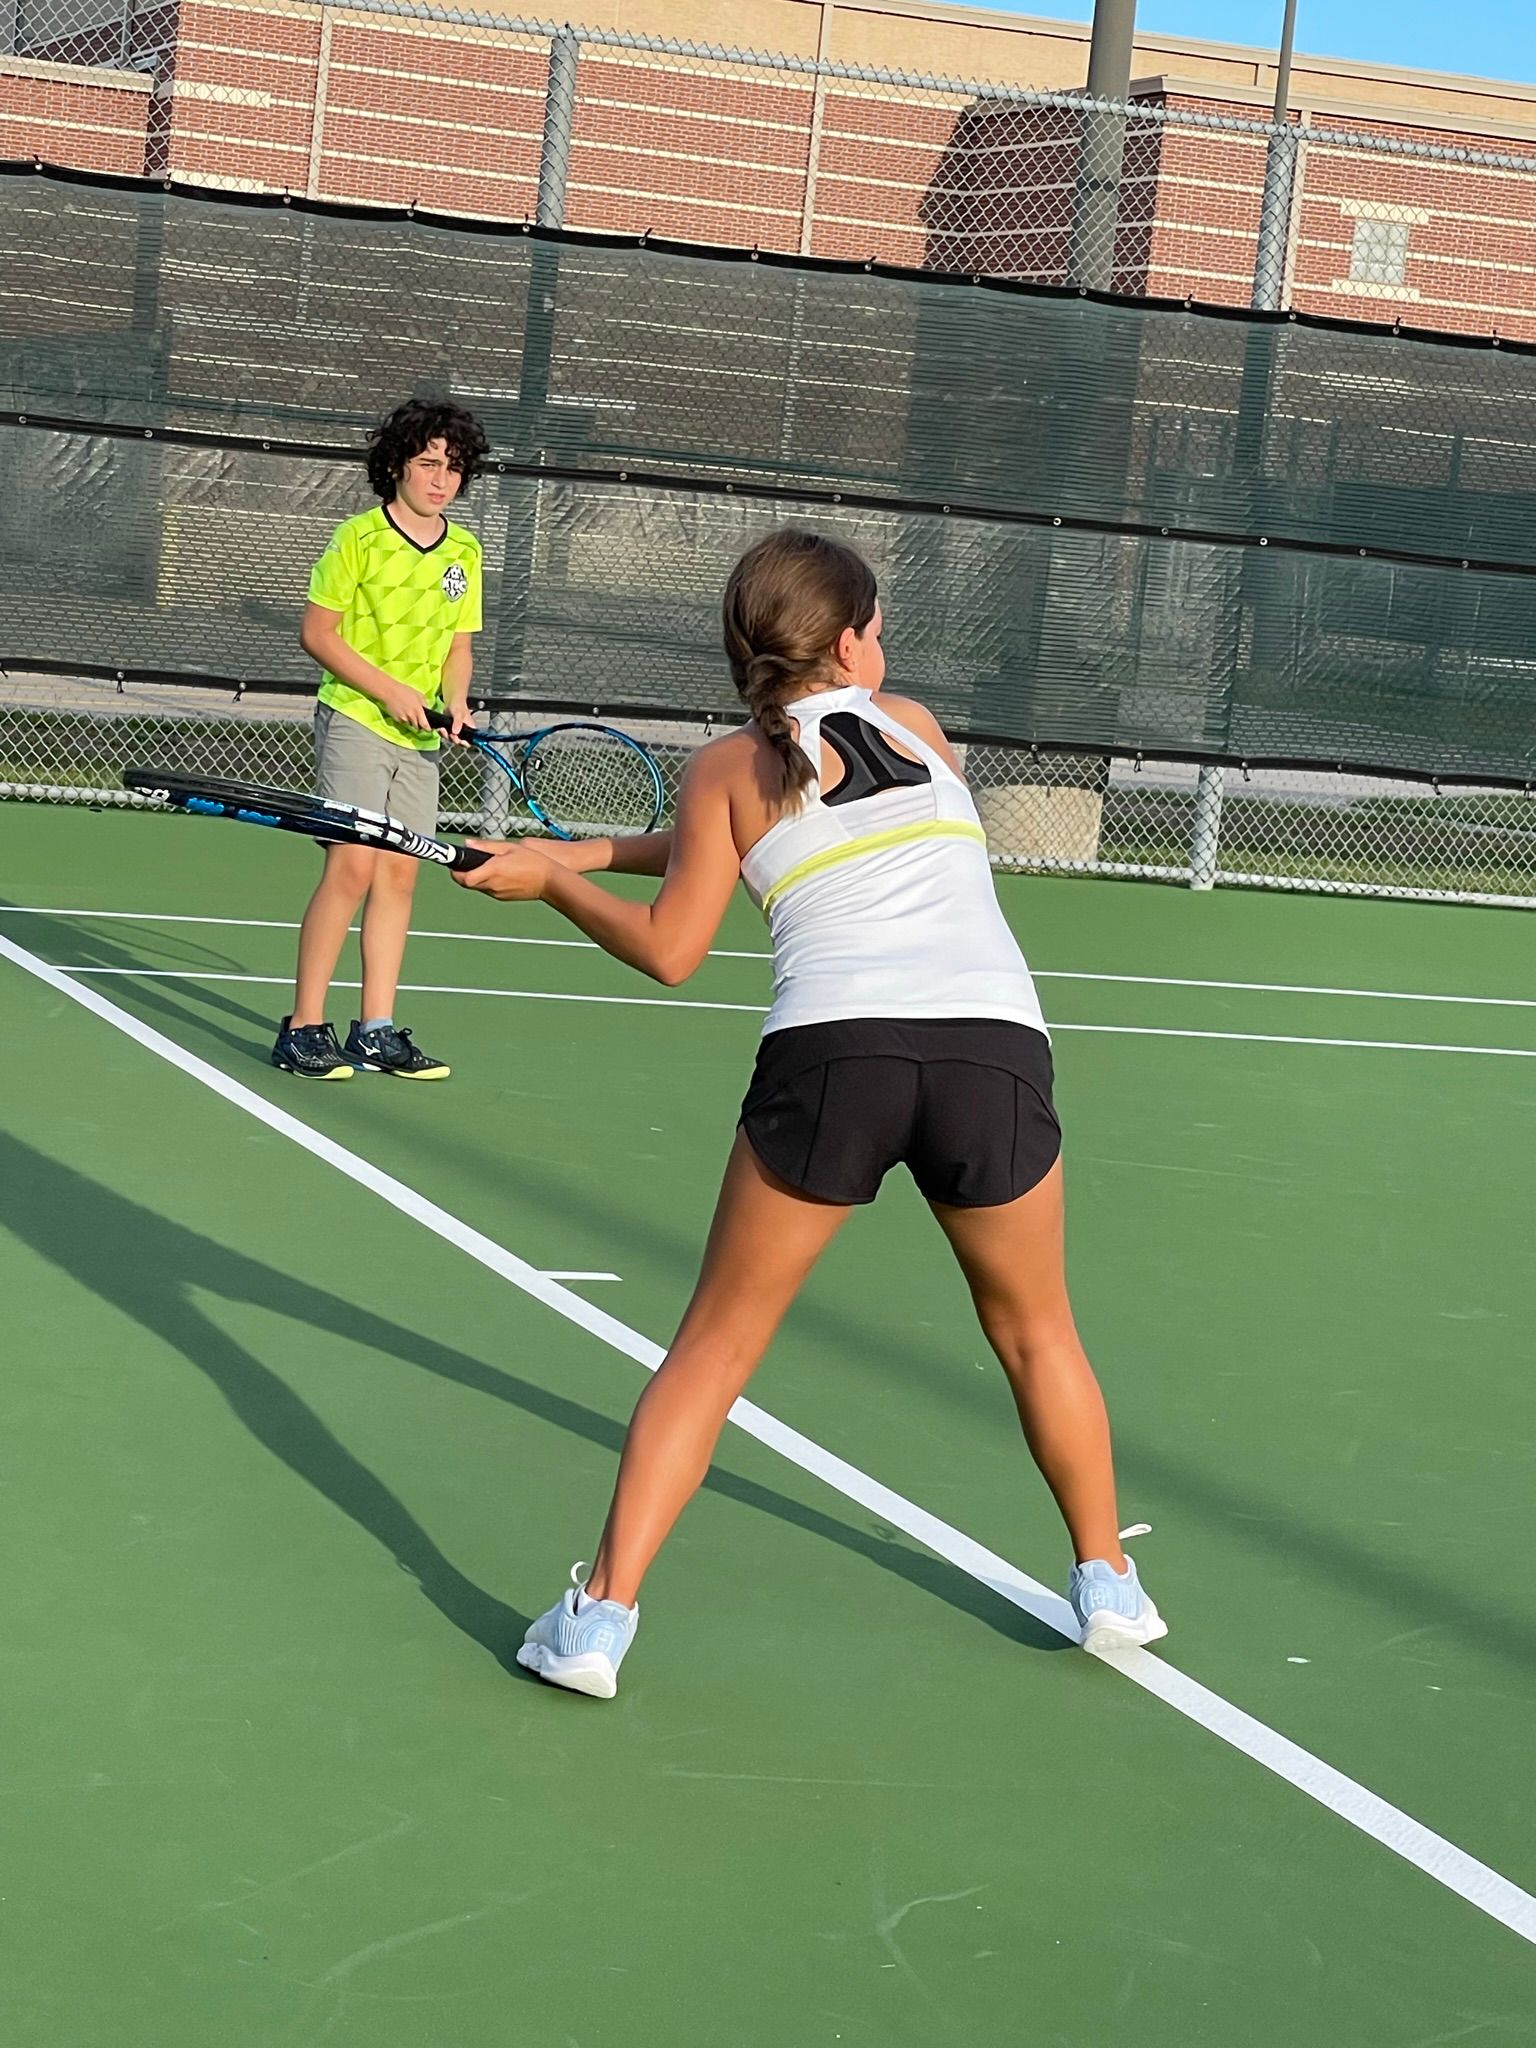 Tennis Lessons in Houston, TX